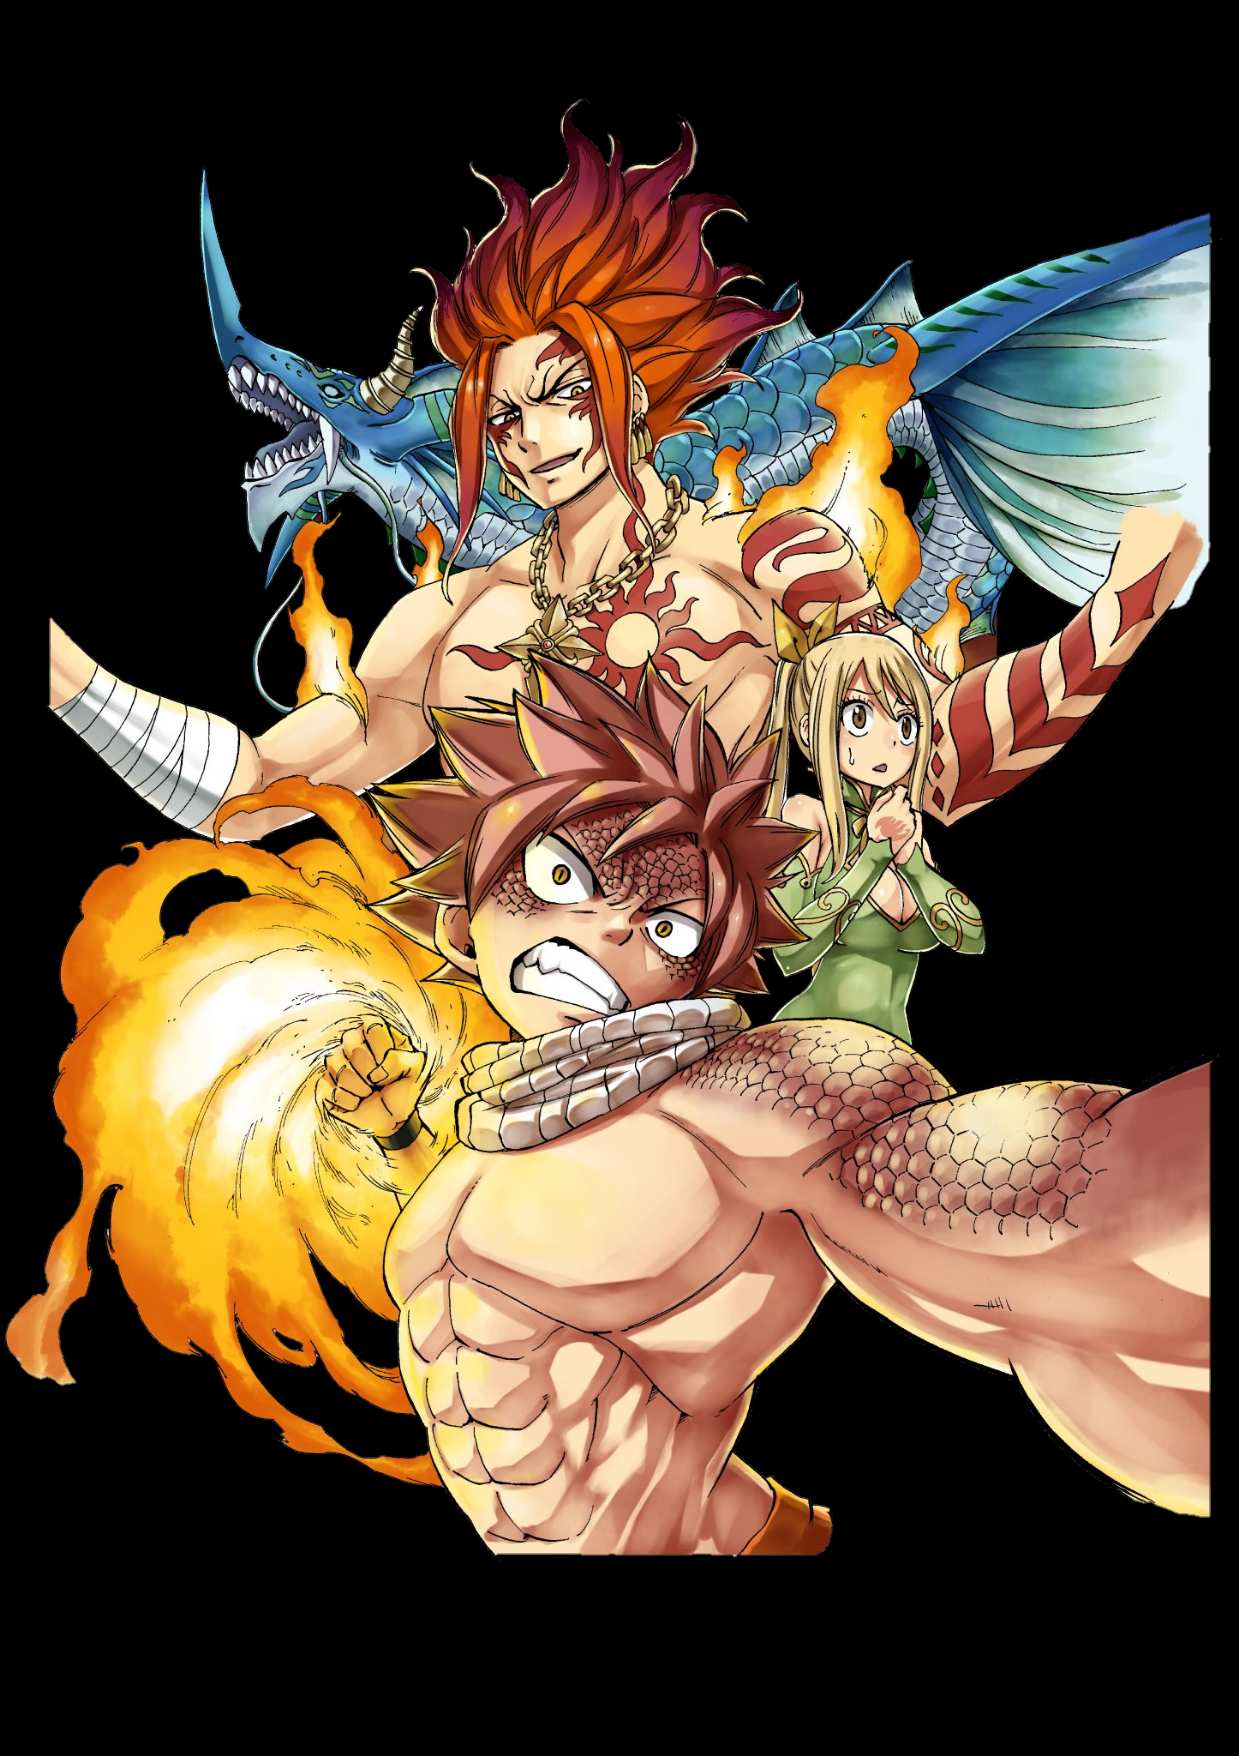 Fairy Tail Discussion (Anime)